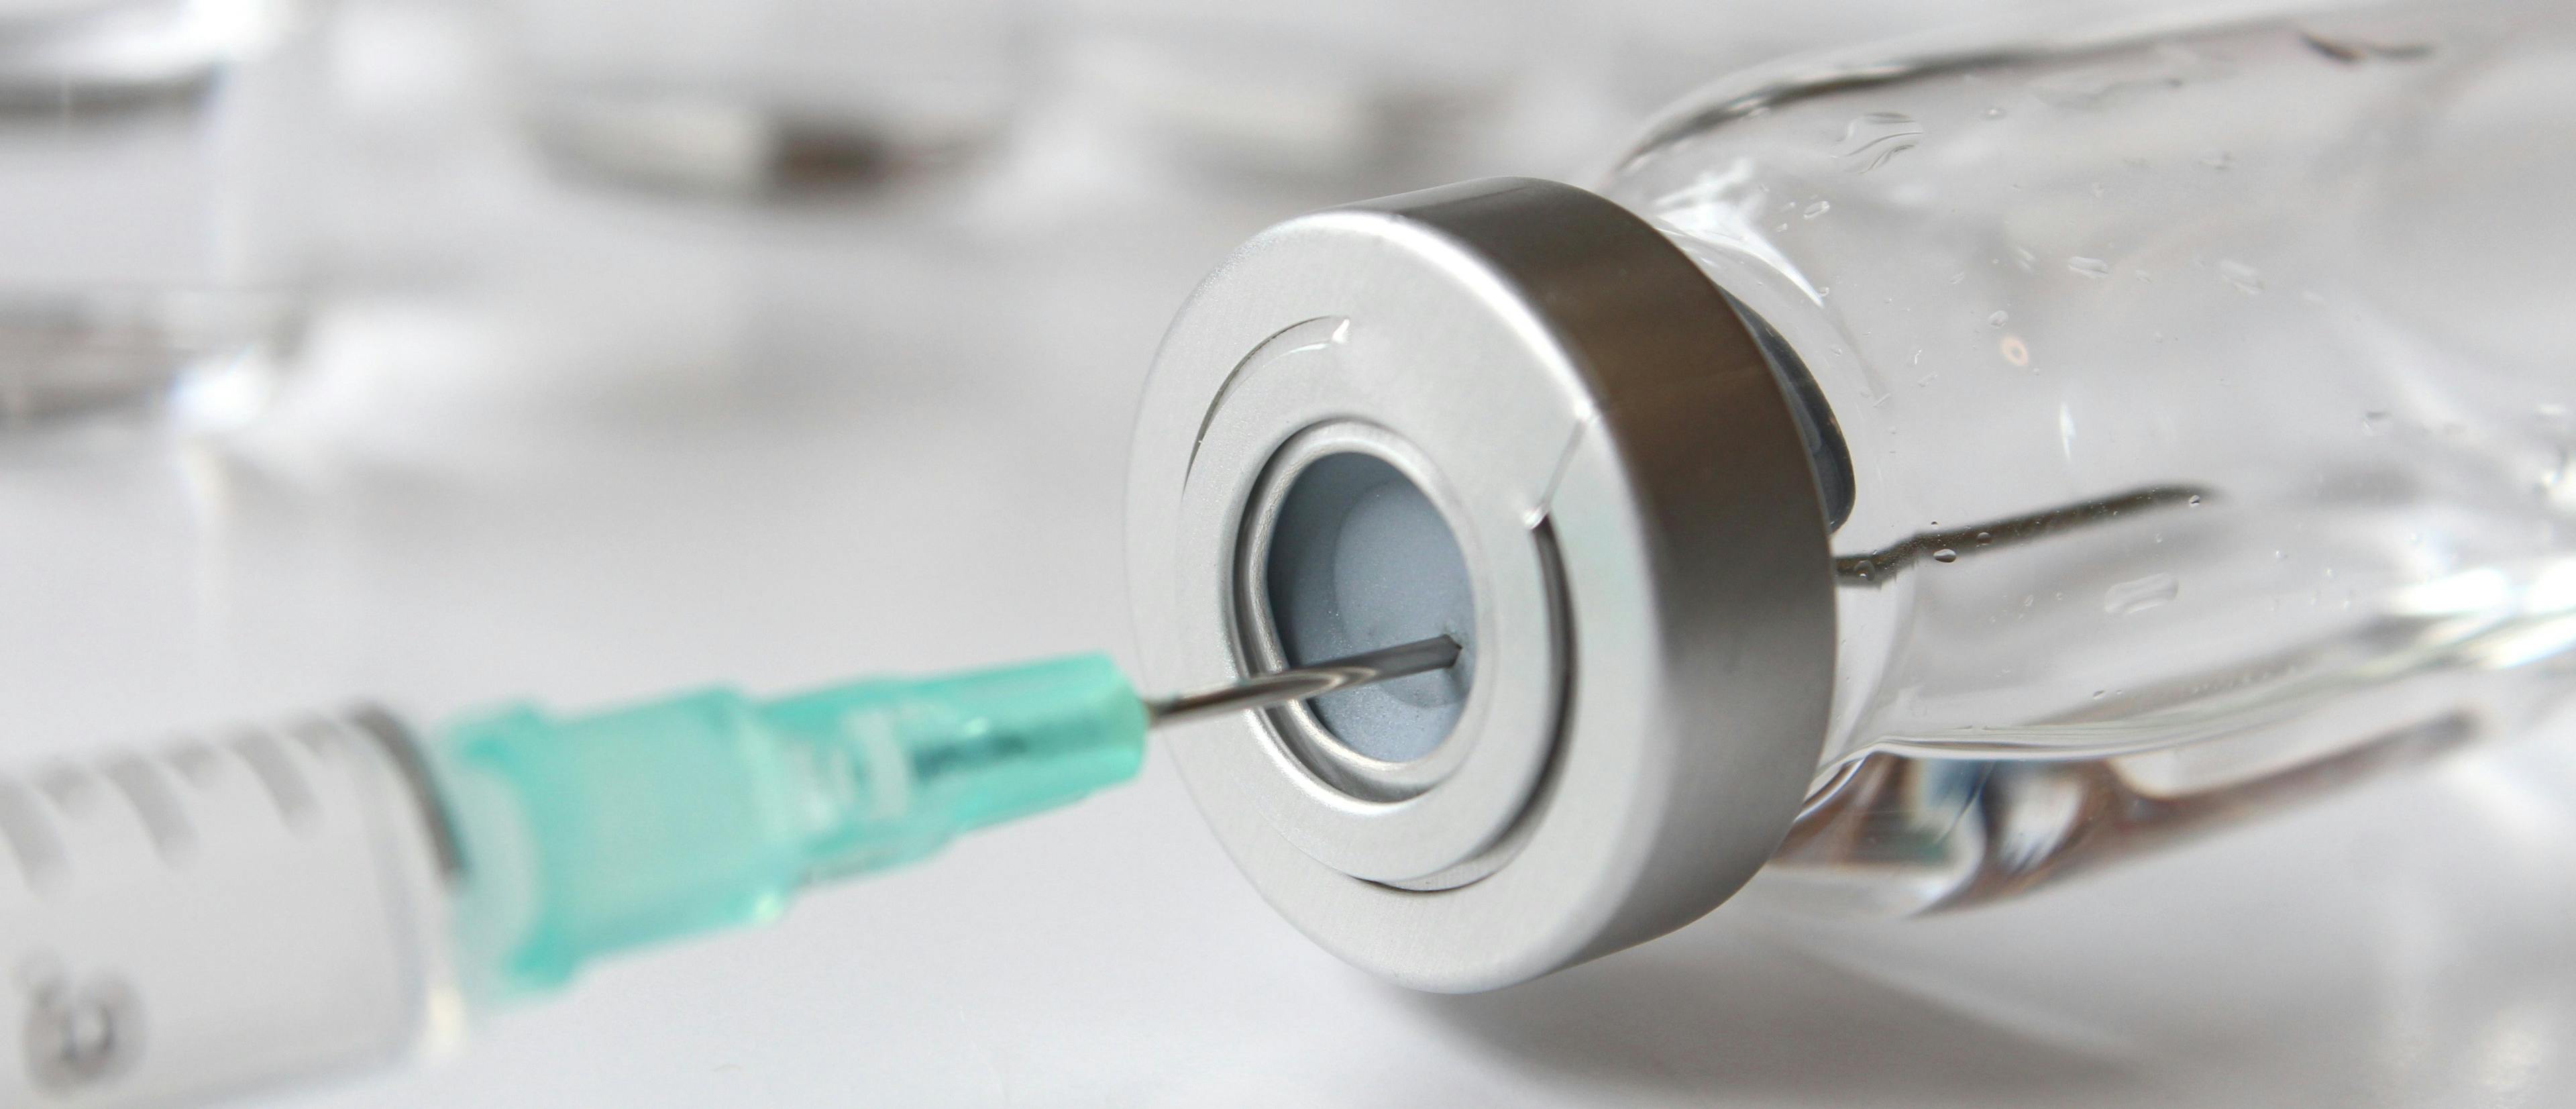 Pharmacy Associations Discourage Pharmacists from Preparing Lethal Injections